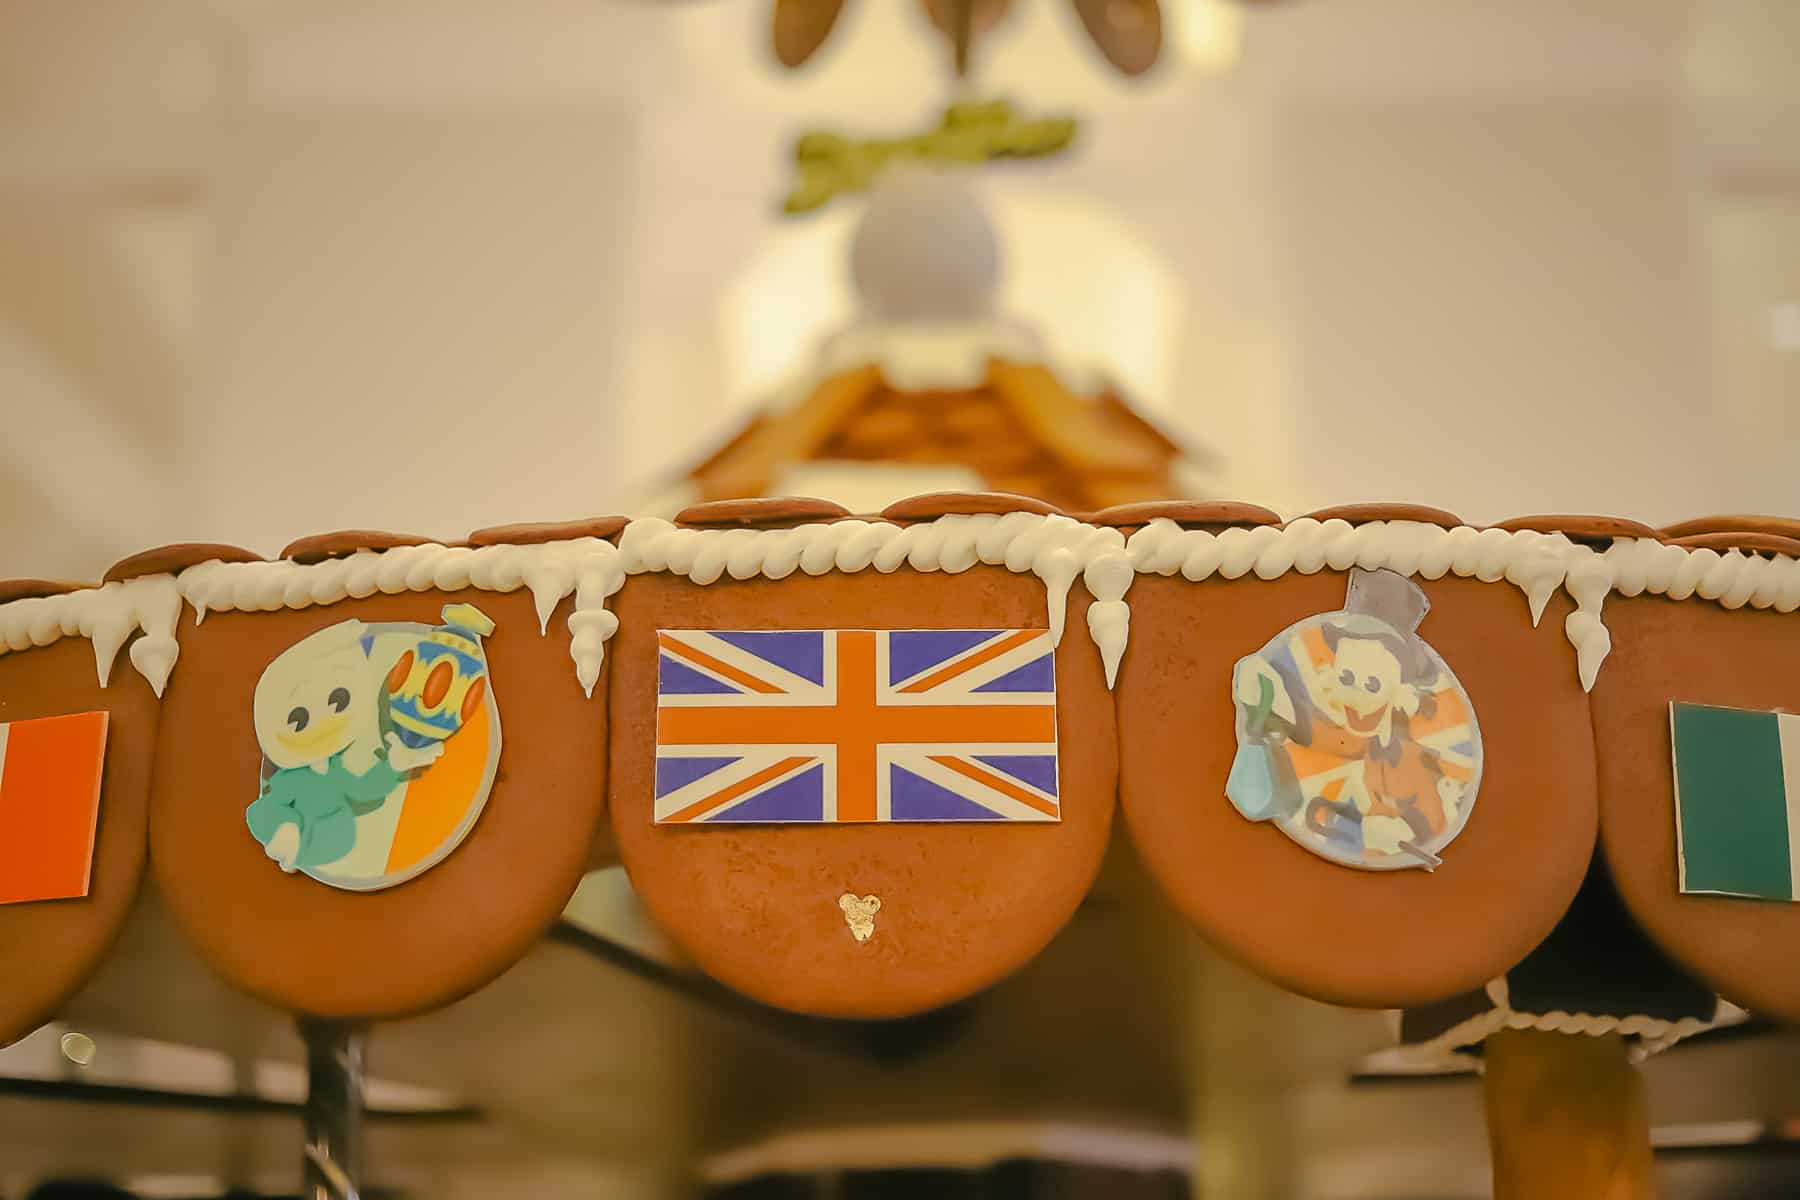 Airbrushed emblem that show the McDuck family and flags on the display